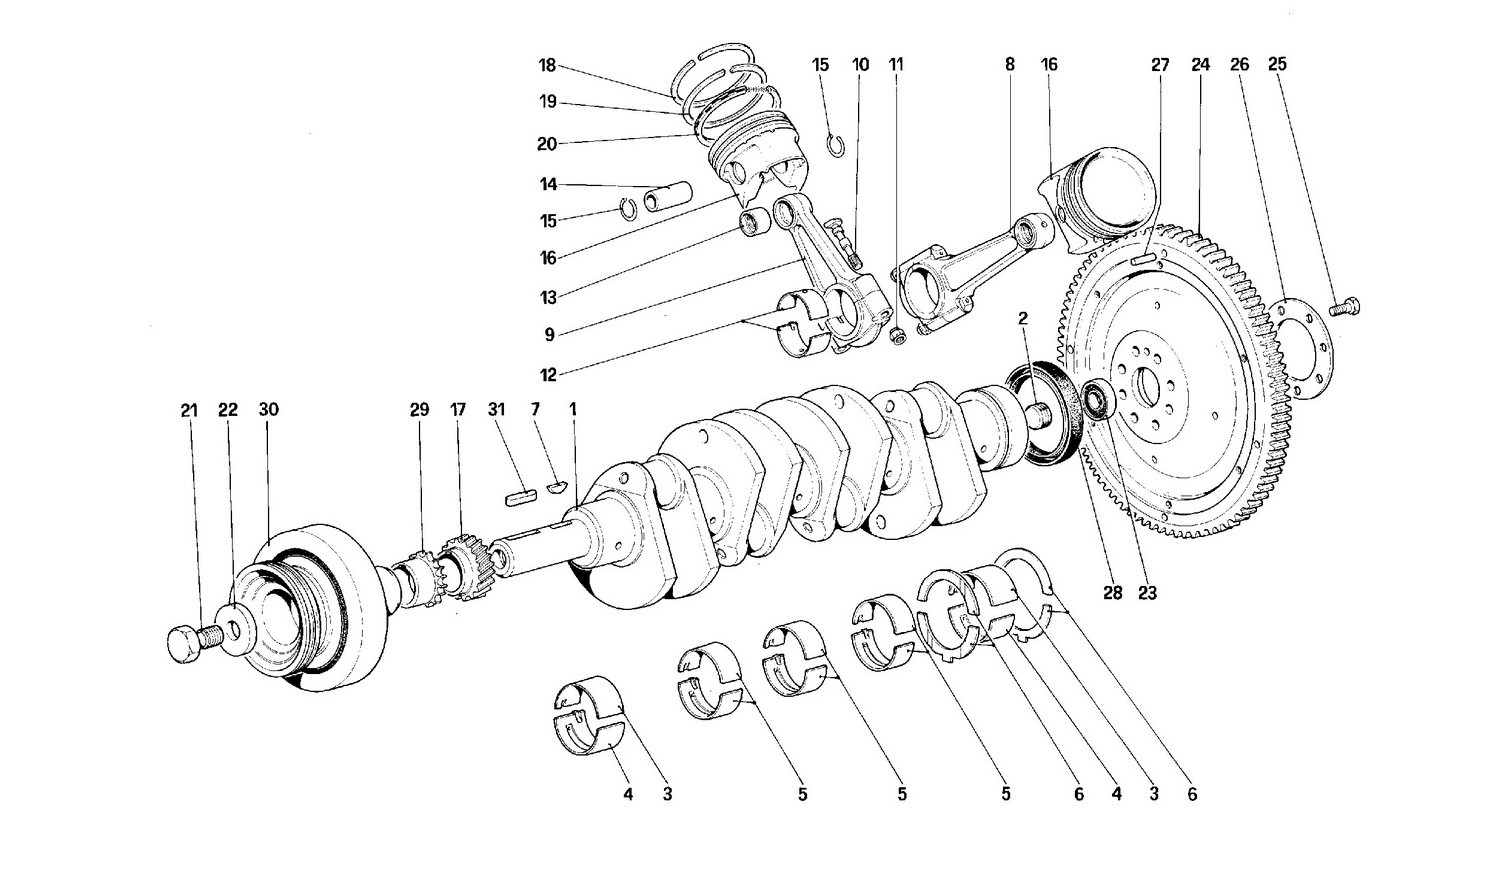 Driving shaft - Connecting rods and pistons - Motor flywheel